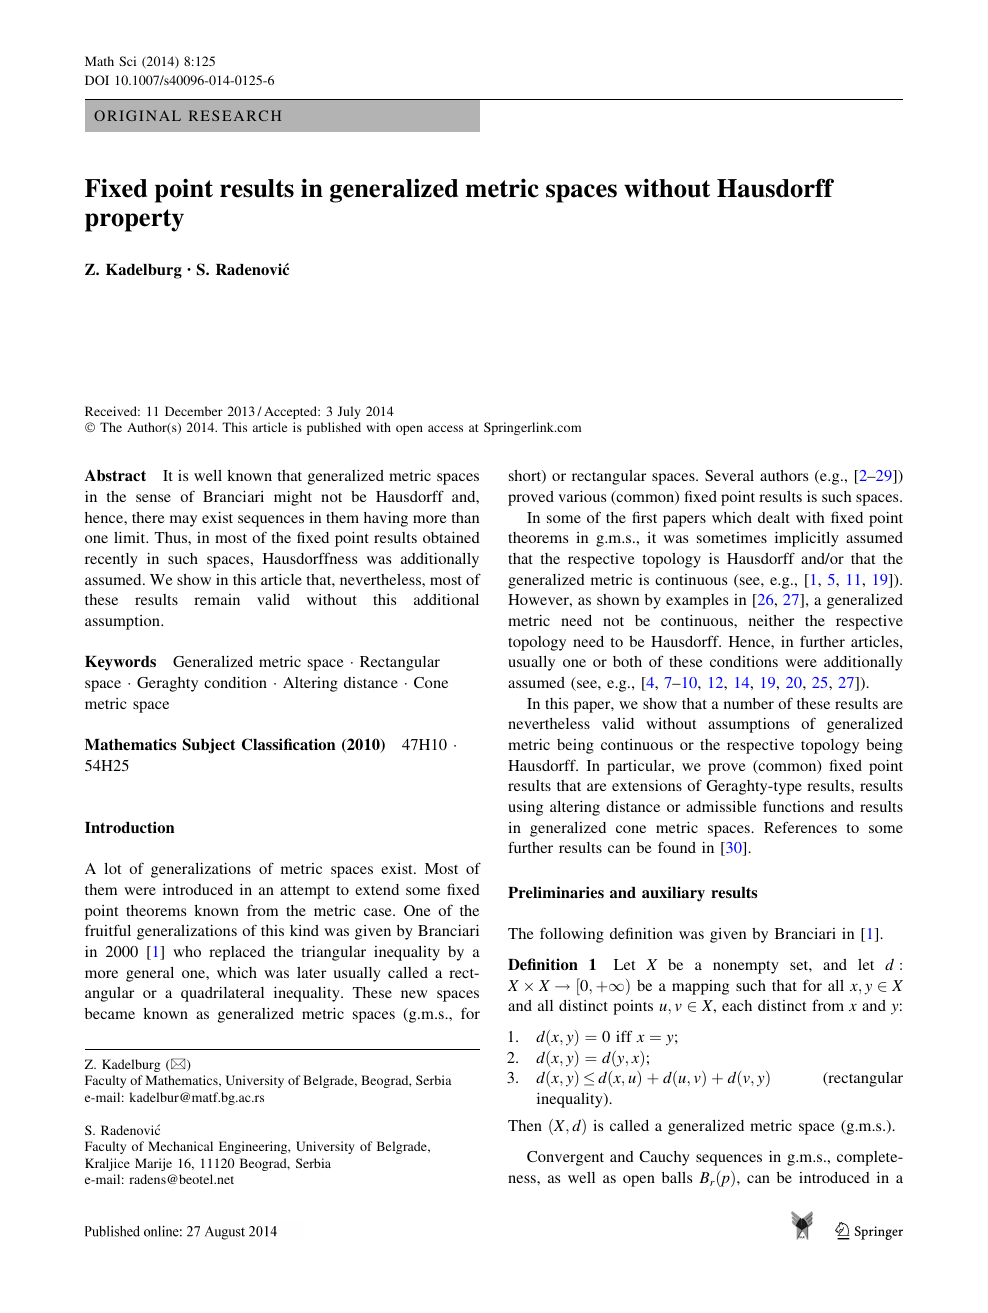 Fixed Point Results In Generalized Metric Spaces Without Hausdorff Property Topic Of Research Paper In Mathematics Download Scholarly Article Pdf And Read For Free On Cyberleninka Open Science Hub